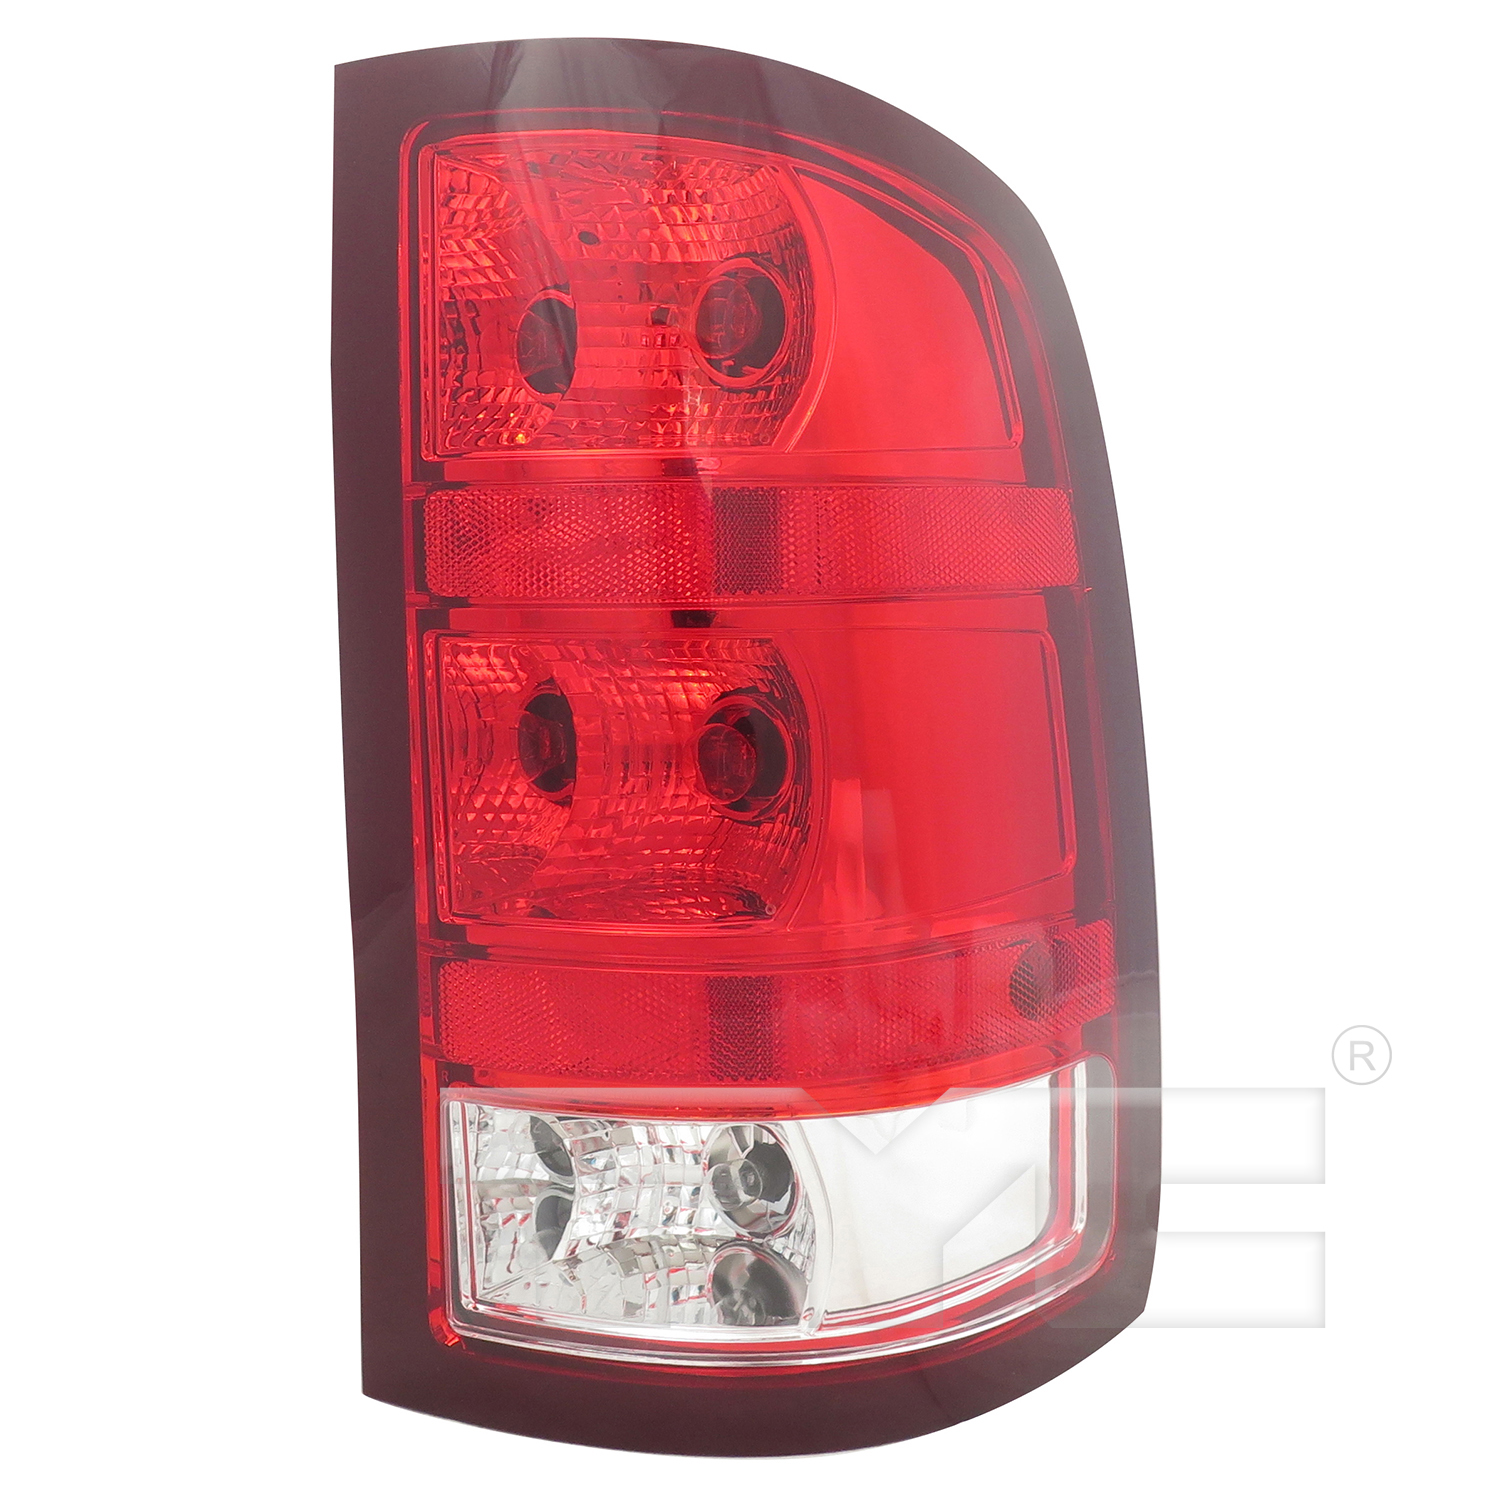 Aftermarket TAILLIGHTS for GMC - SIERRA 2500 HD, SIERRA 2500 HD,10-12,RT Taillamp assy